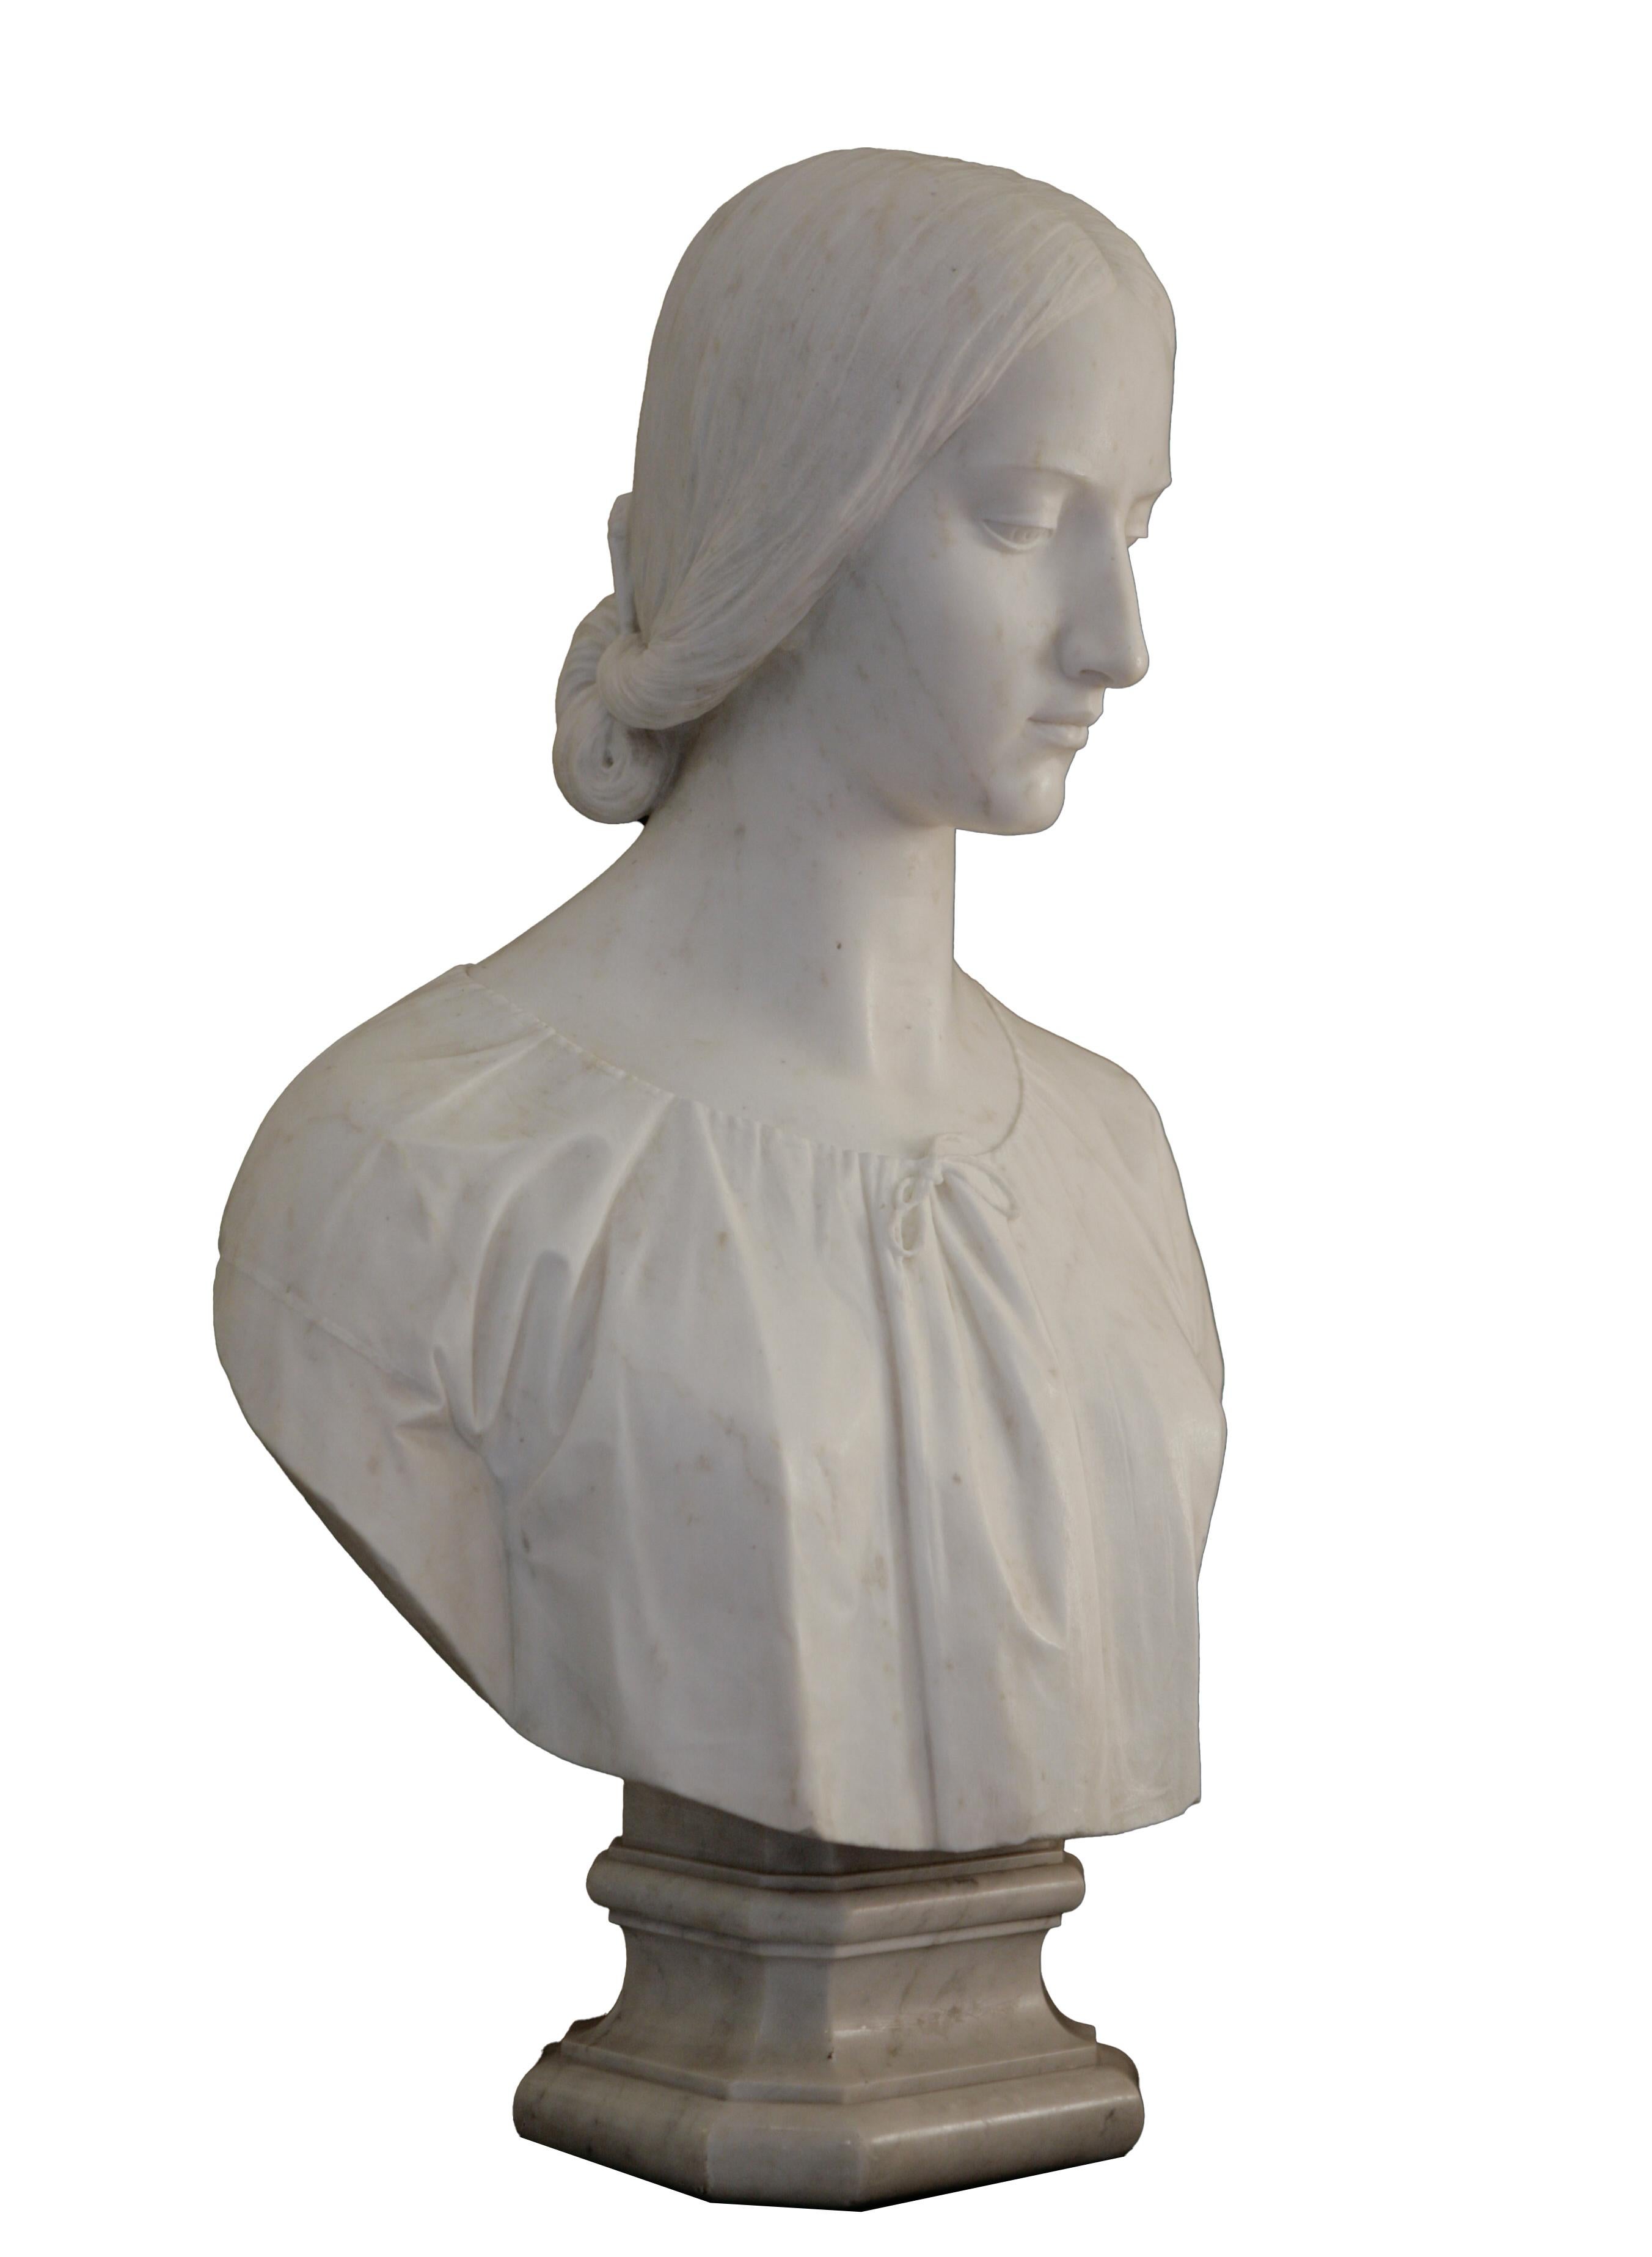 Female bust in white marble - 19th century - Gray Figurative Sculpture by Unknown